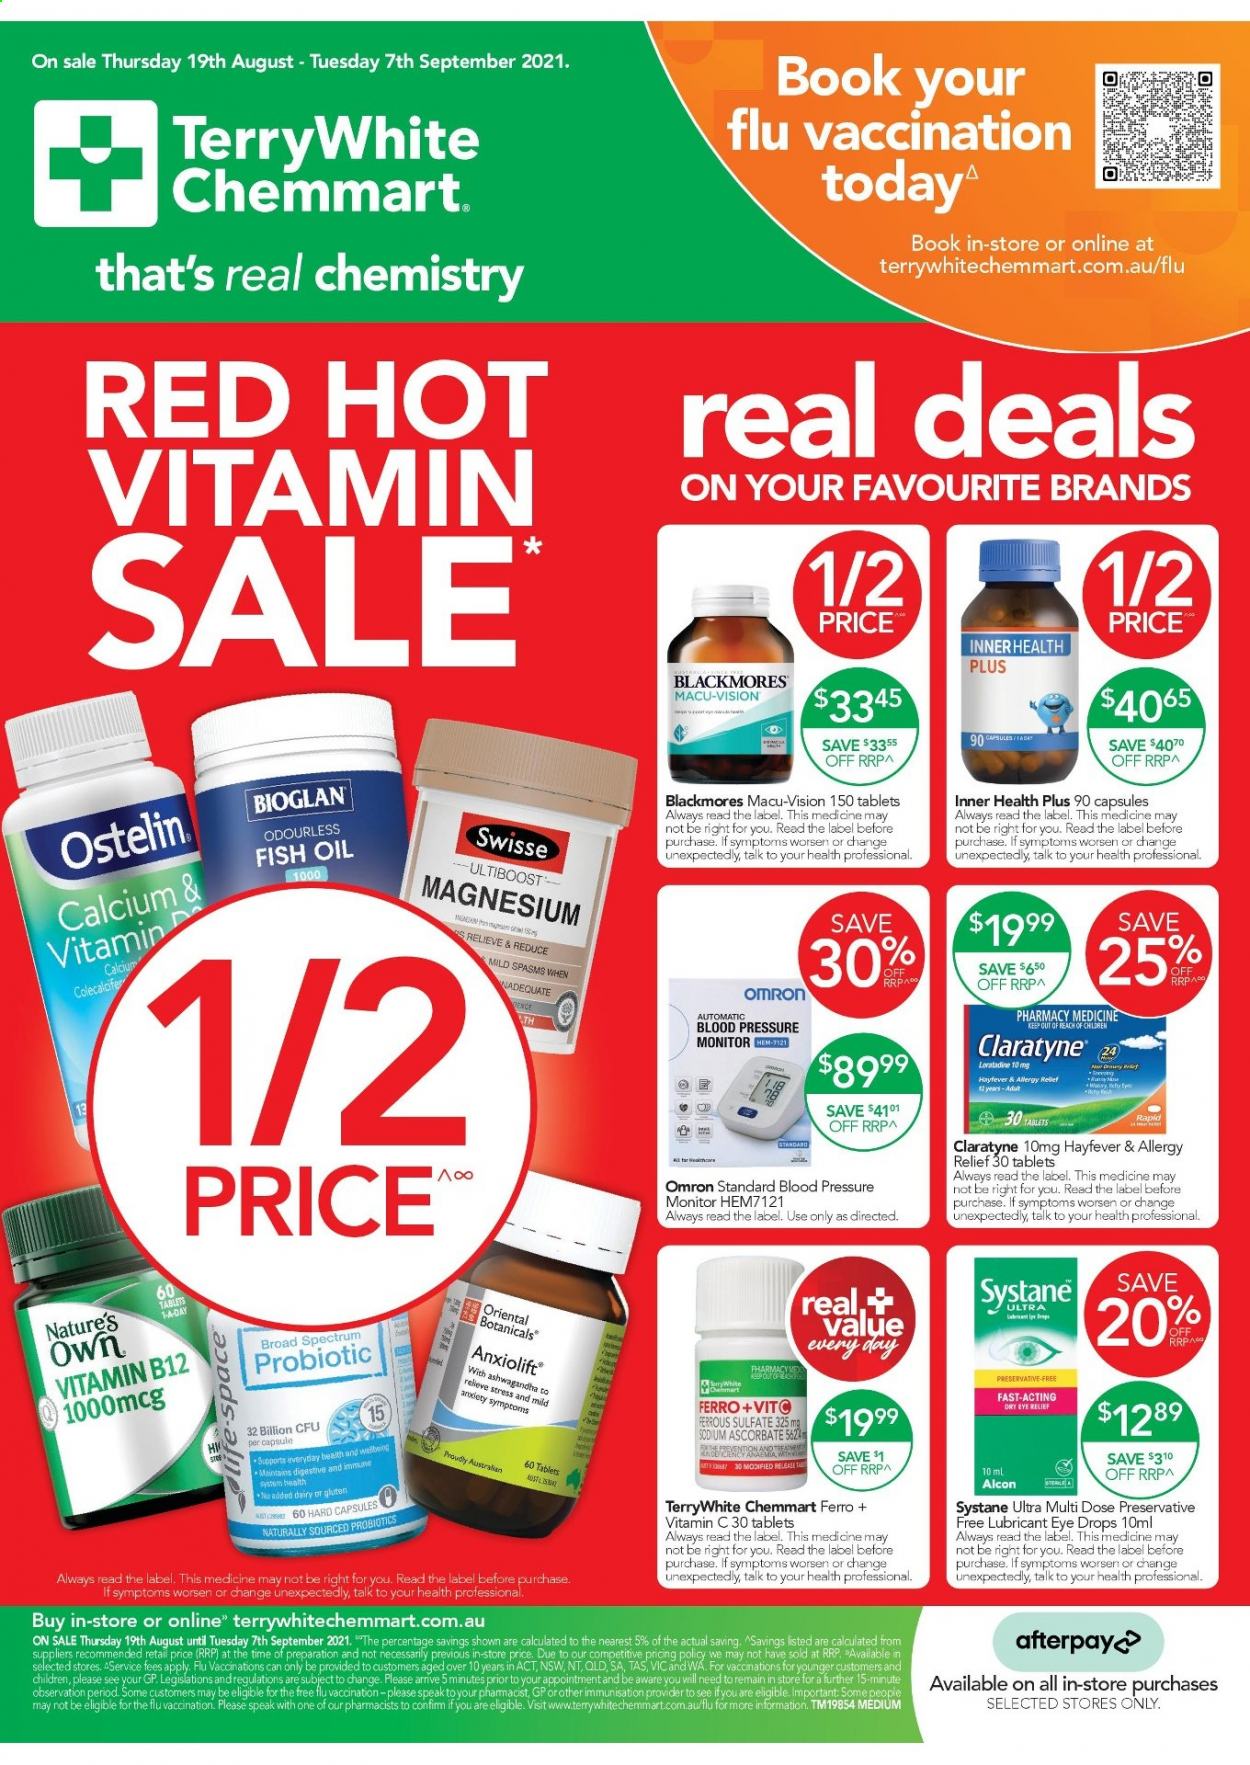 thumbnail - TerryWhite Chemmart Catalogue - 19 Aug 2021 - 7 Sep 2021 - Sales products - Swisse, calcium, fish oil, magnesium, Systane, vitamin c, probiotics, eye drops, vitamin B12, Nature's Own, Ostelin, Bioglan, Blackmores, Claratyne, allergy relief, Omron. Page 1.